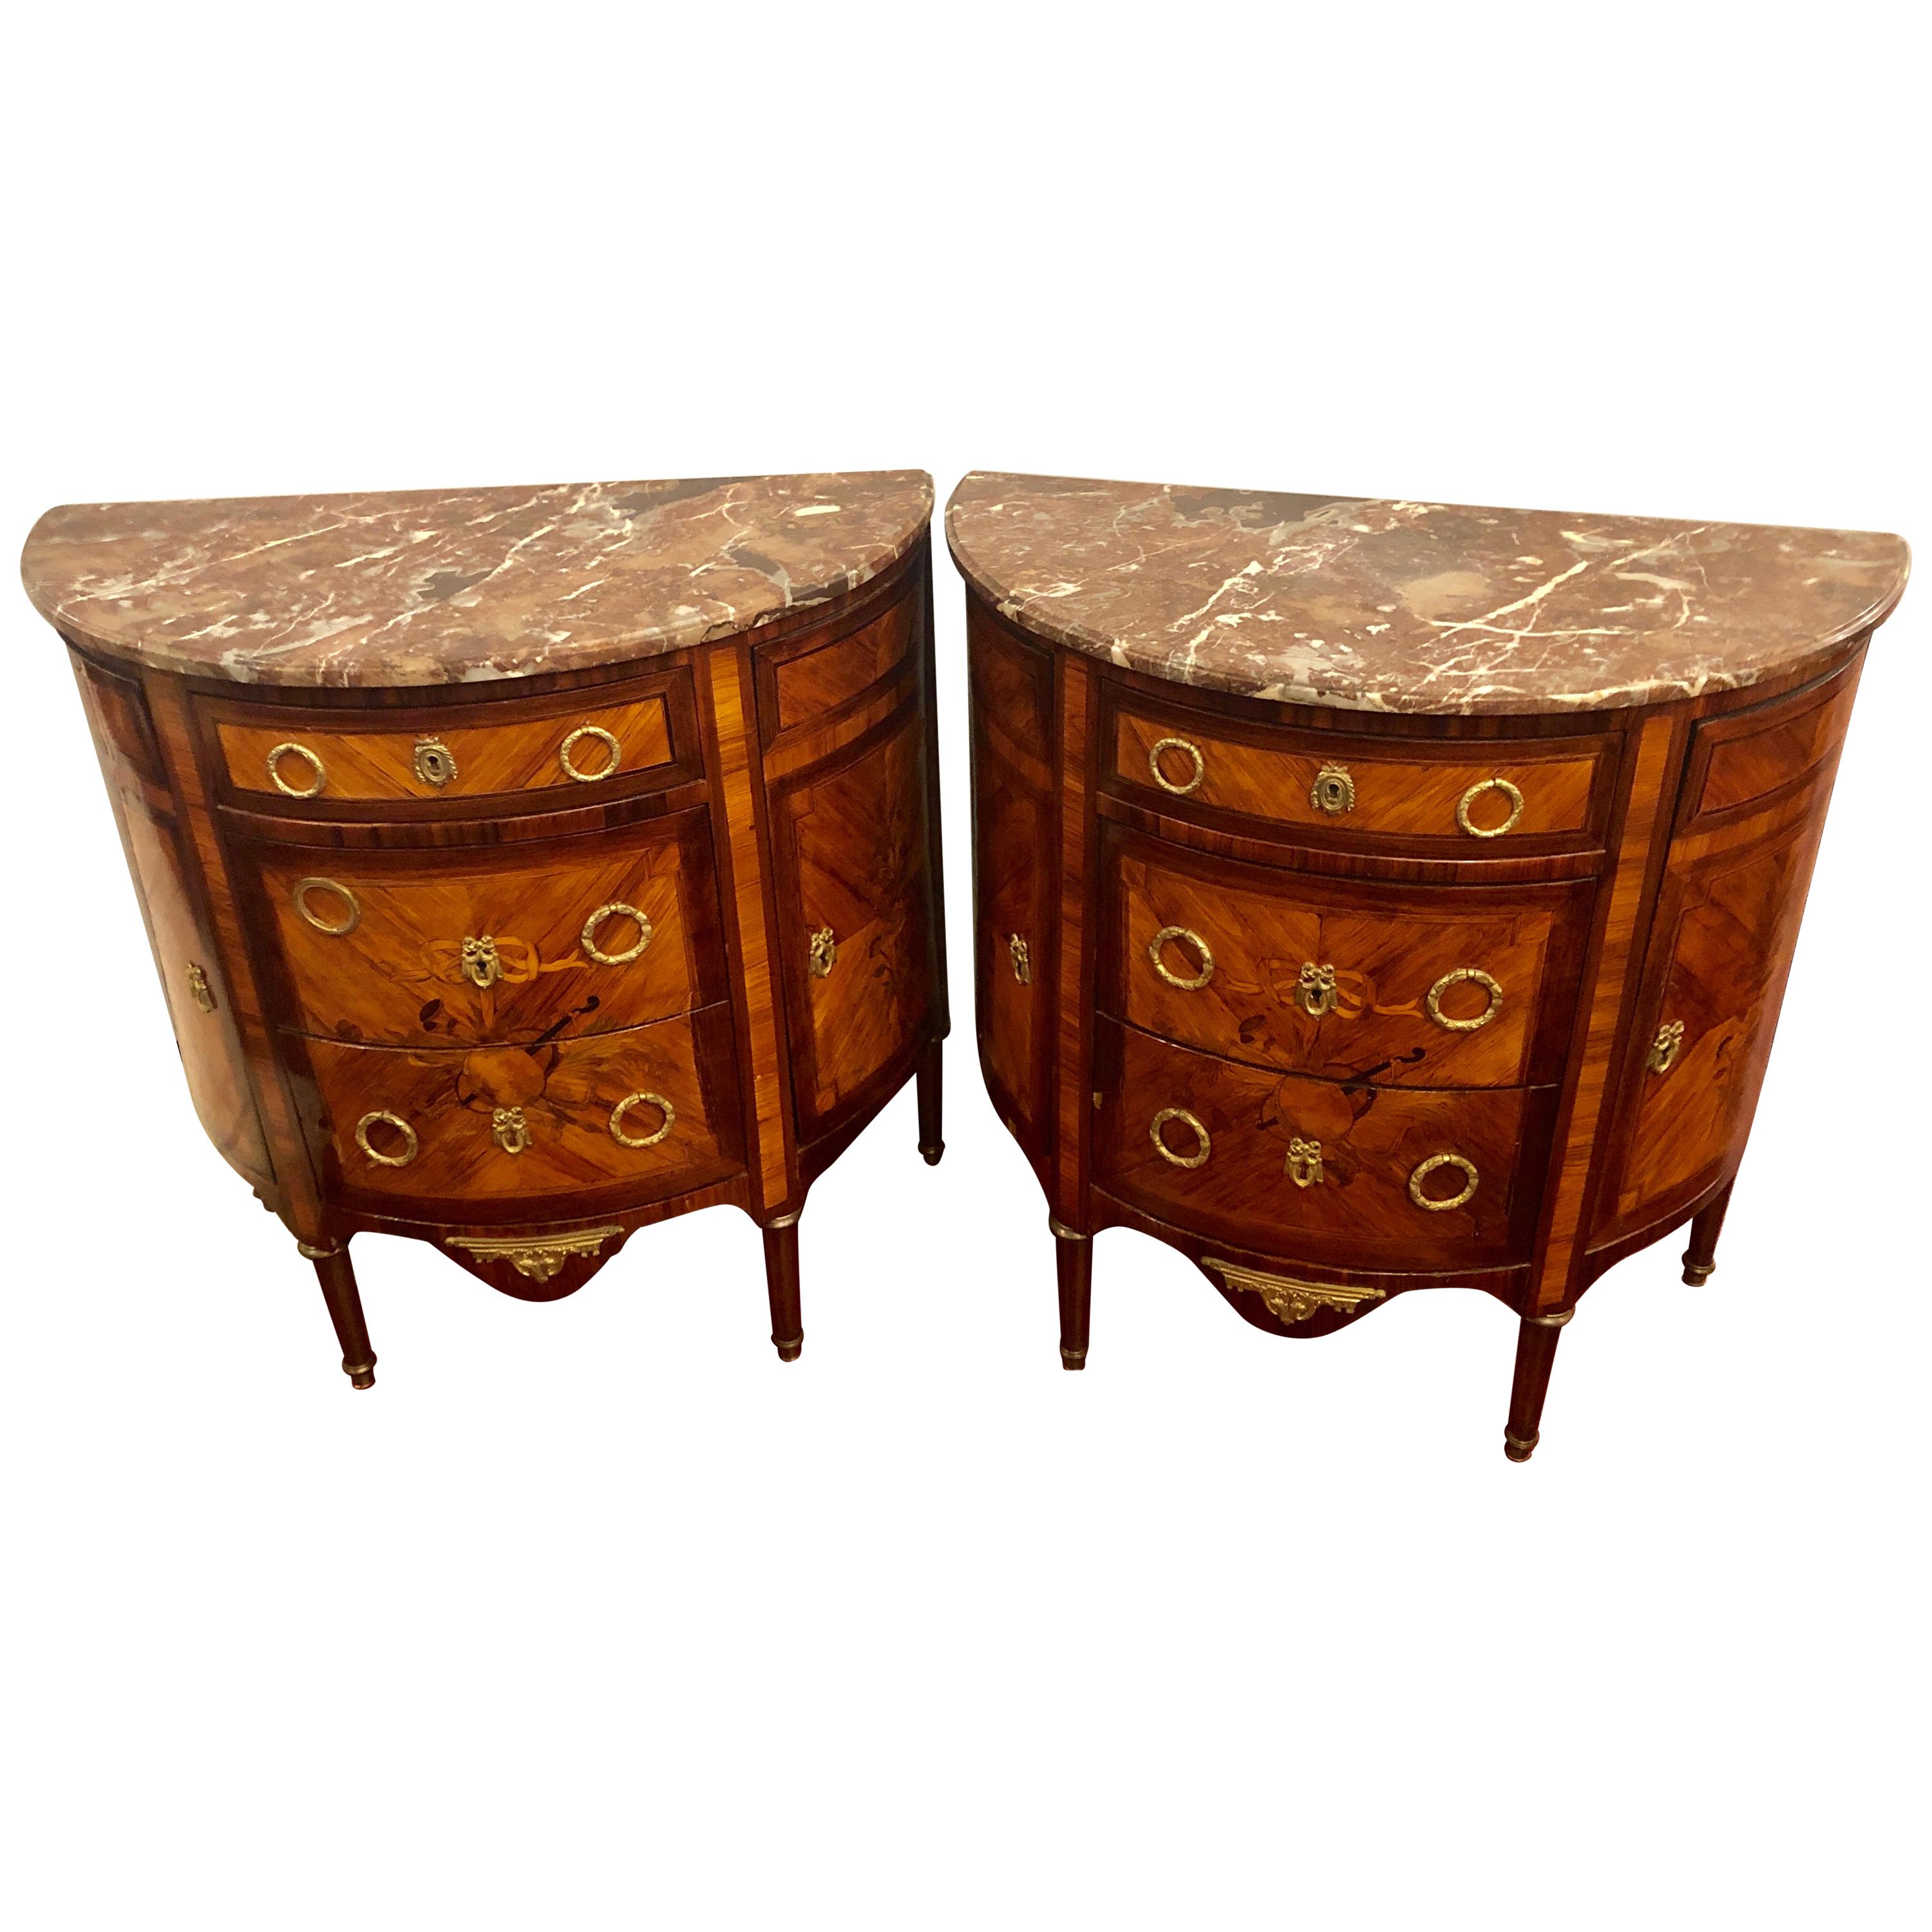 Pair of 19th Century Inlaid French Demilune Commodes or Nightstands